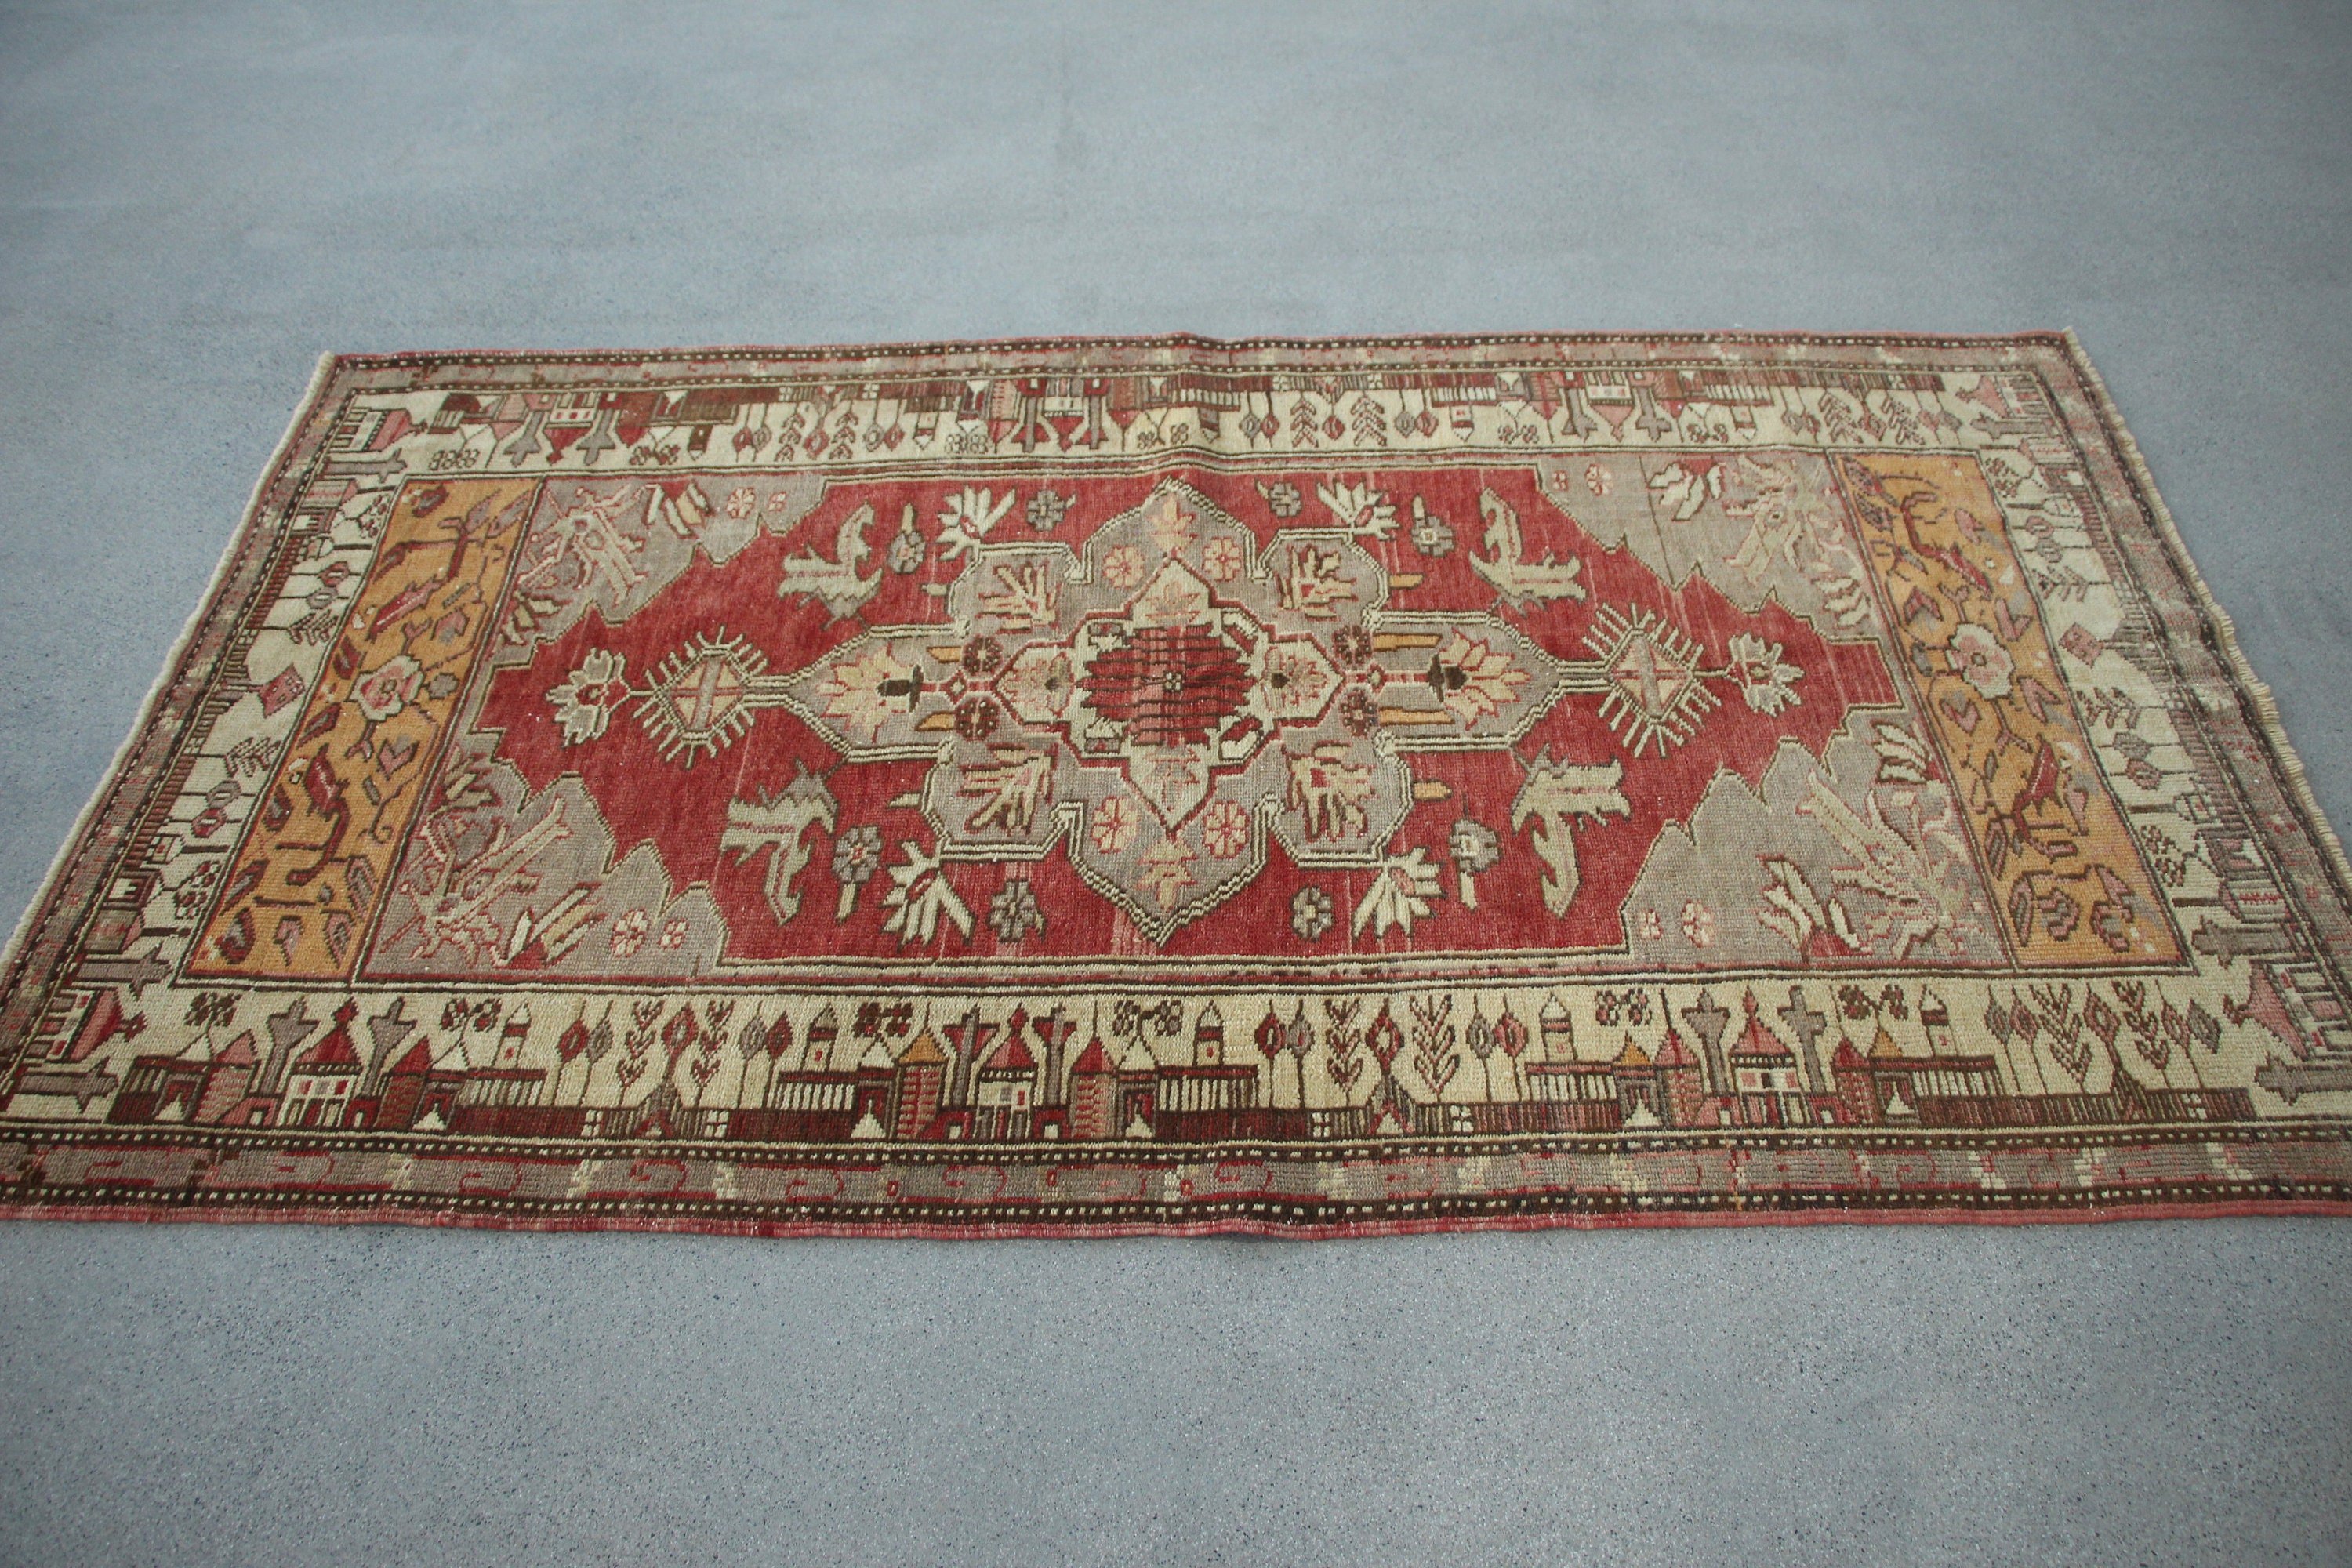 Red Cool Rugs, Entry Rug, Moroccan Rugs, Turkish Rug, Home Decor Rugs, 3.6x6.6 ft Accent Rugs, Bedroom Rugs, Vintage Rug, Rugs for Entry